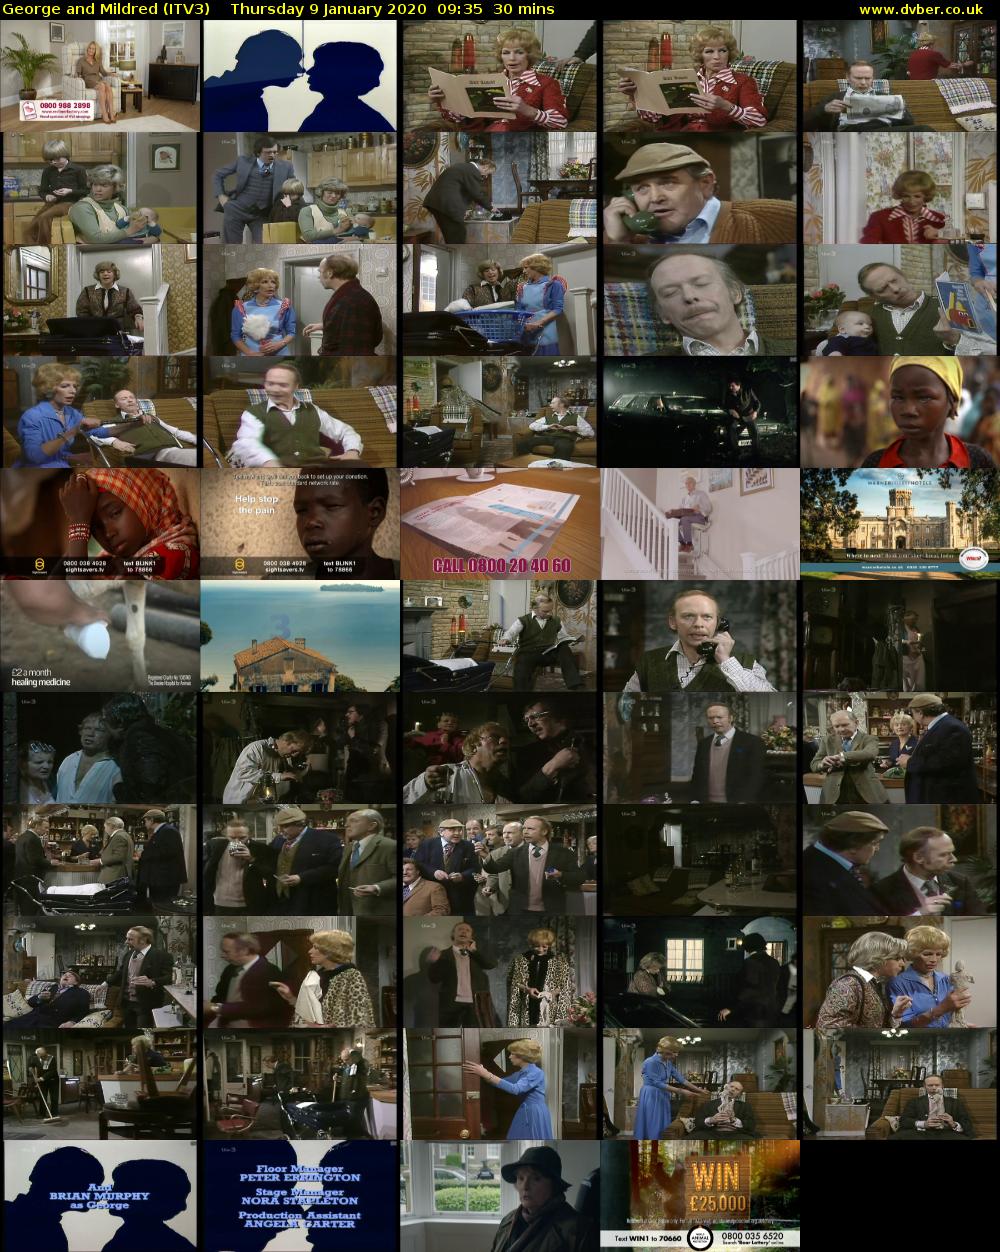 George and Mildred (ITV3) Thursday 9 January 2020 09:35 - 10:05